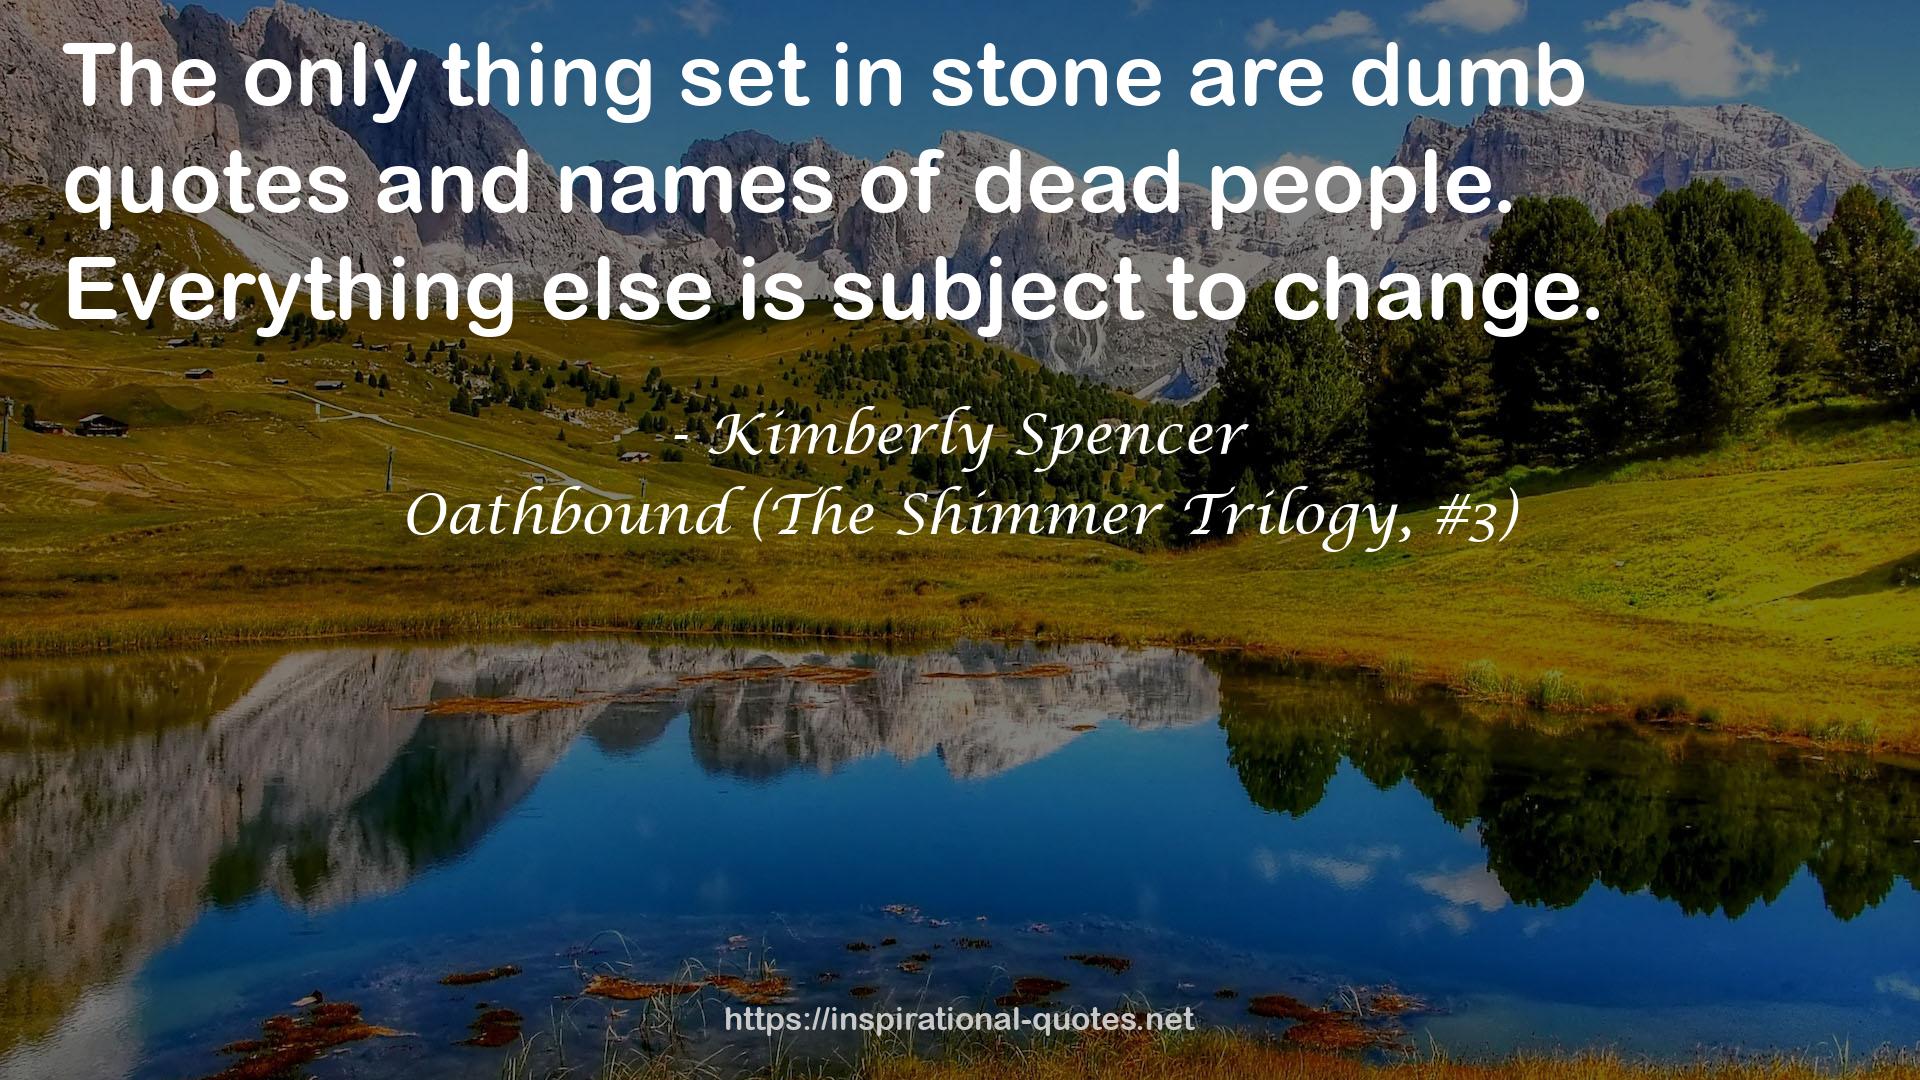 Kimberly Spencer QUOTES